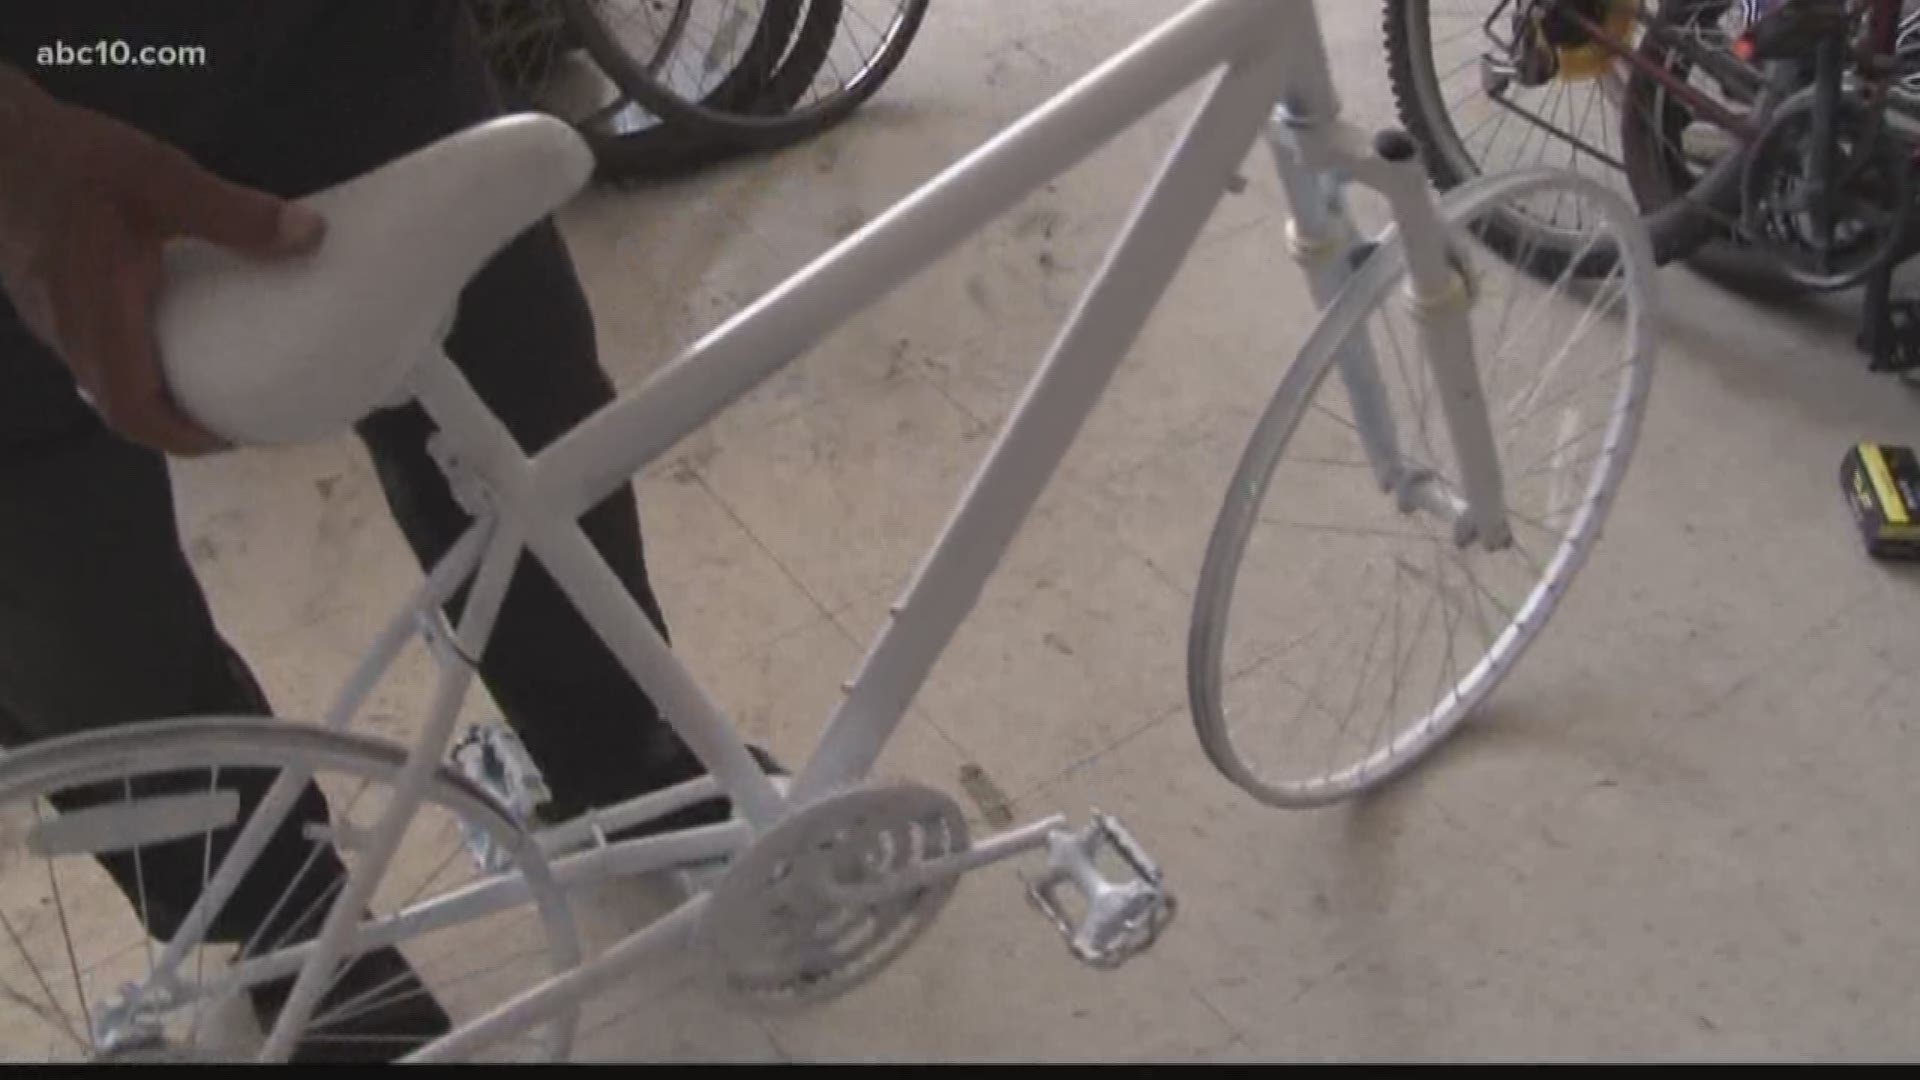 Ghost Bike memorials in Stockton are being done to remember those who've been hit and killed on bikes.